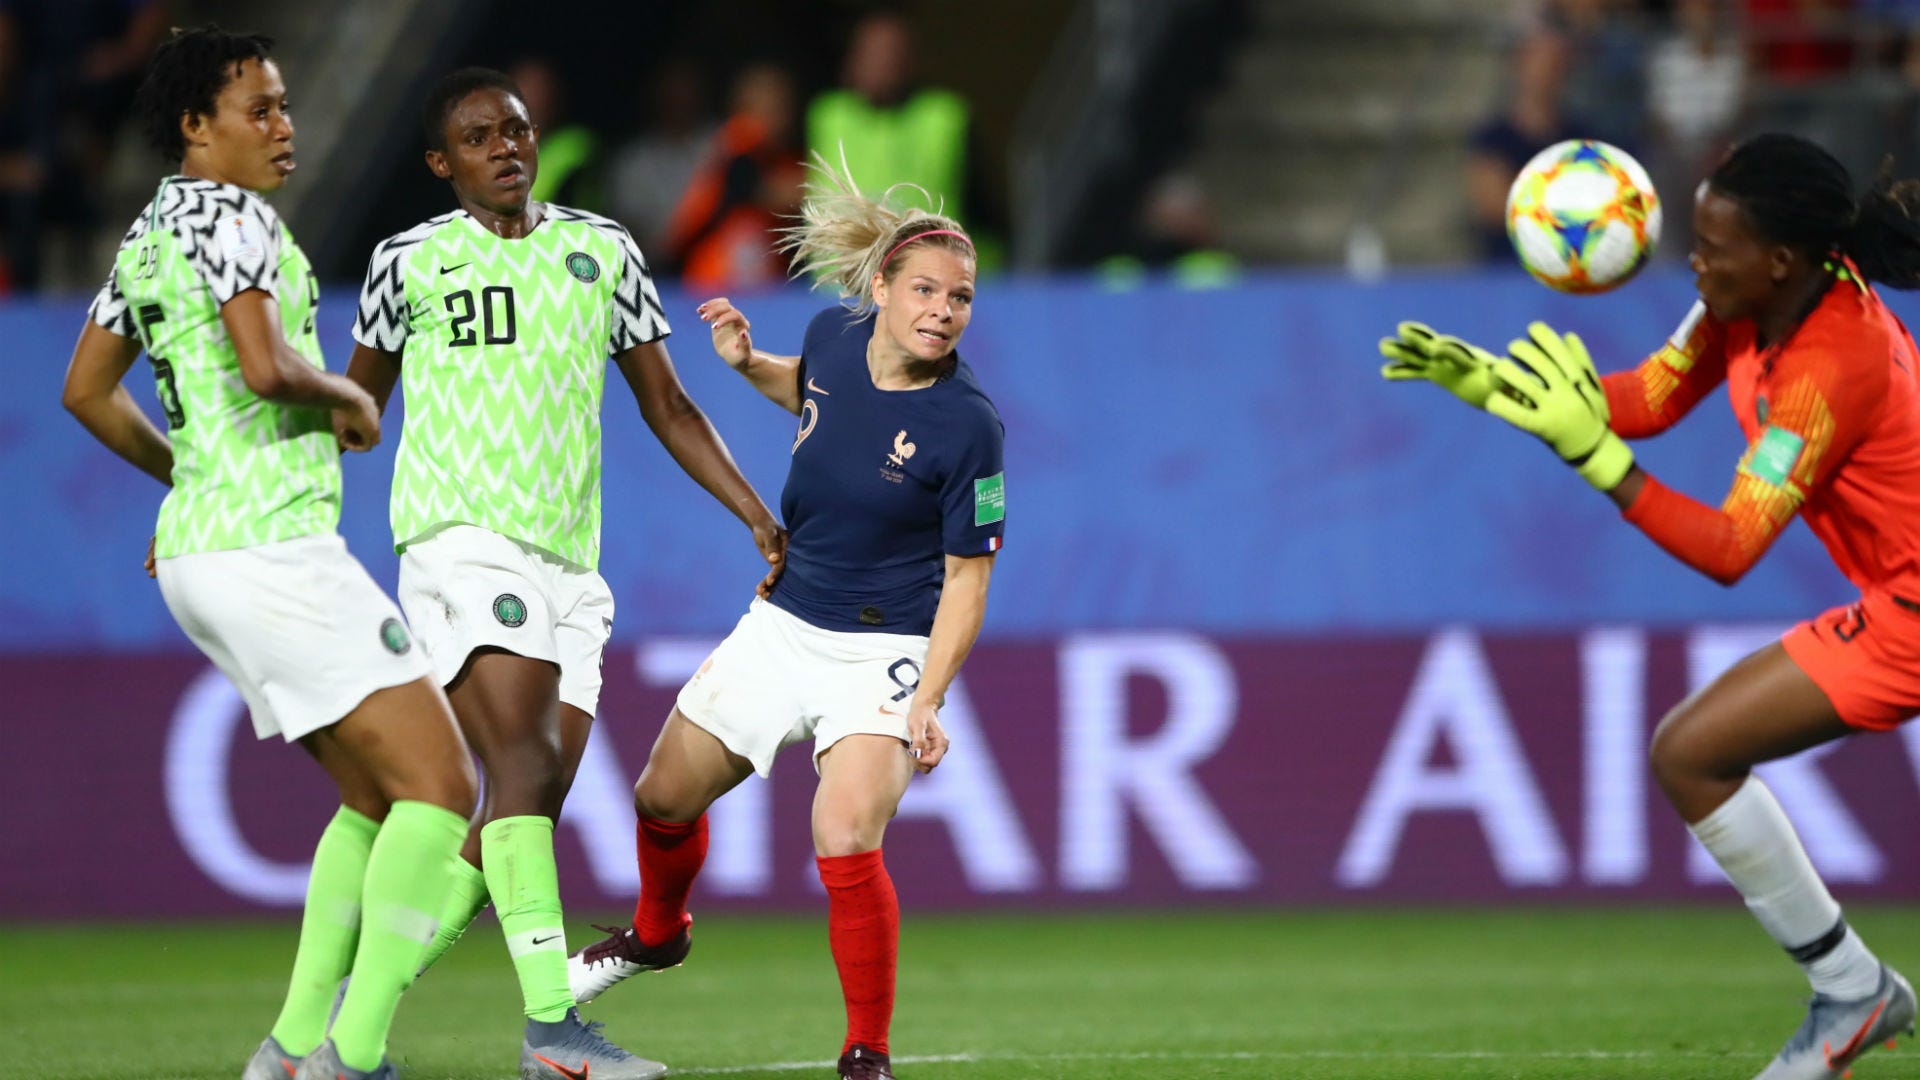 2023 Women's World Cup Super Falcons, Banyana Banyana and rest of